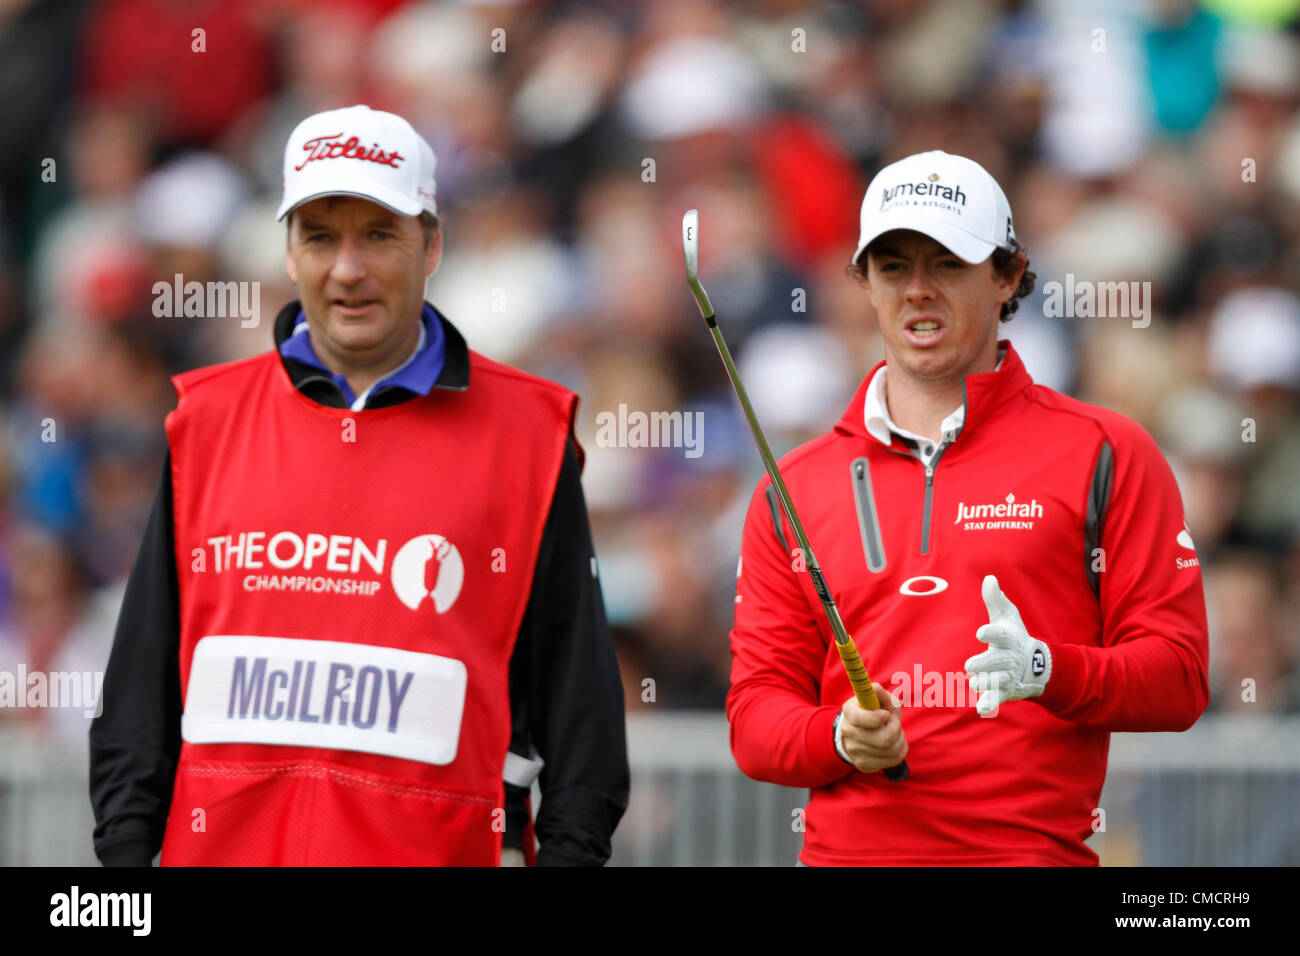 RORY MCILROY WITH CADDY IRELAND LYTHAM & ST.ANNES LANCASHIRE ENGLAND 20 July 2012 Stock Photo